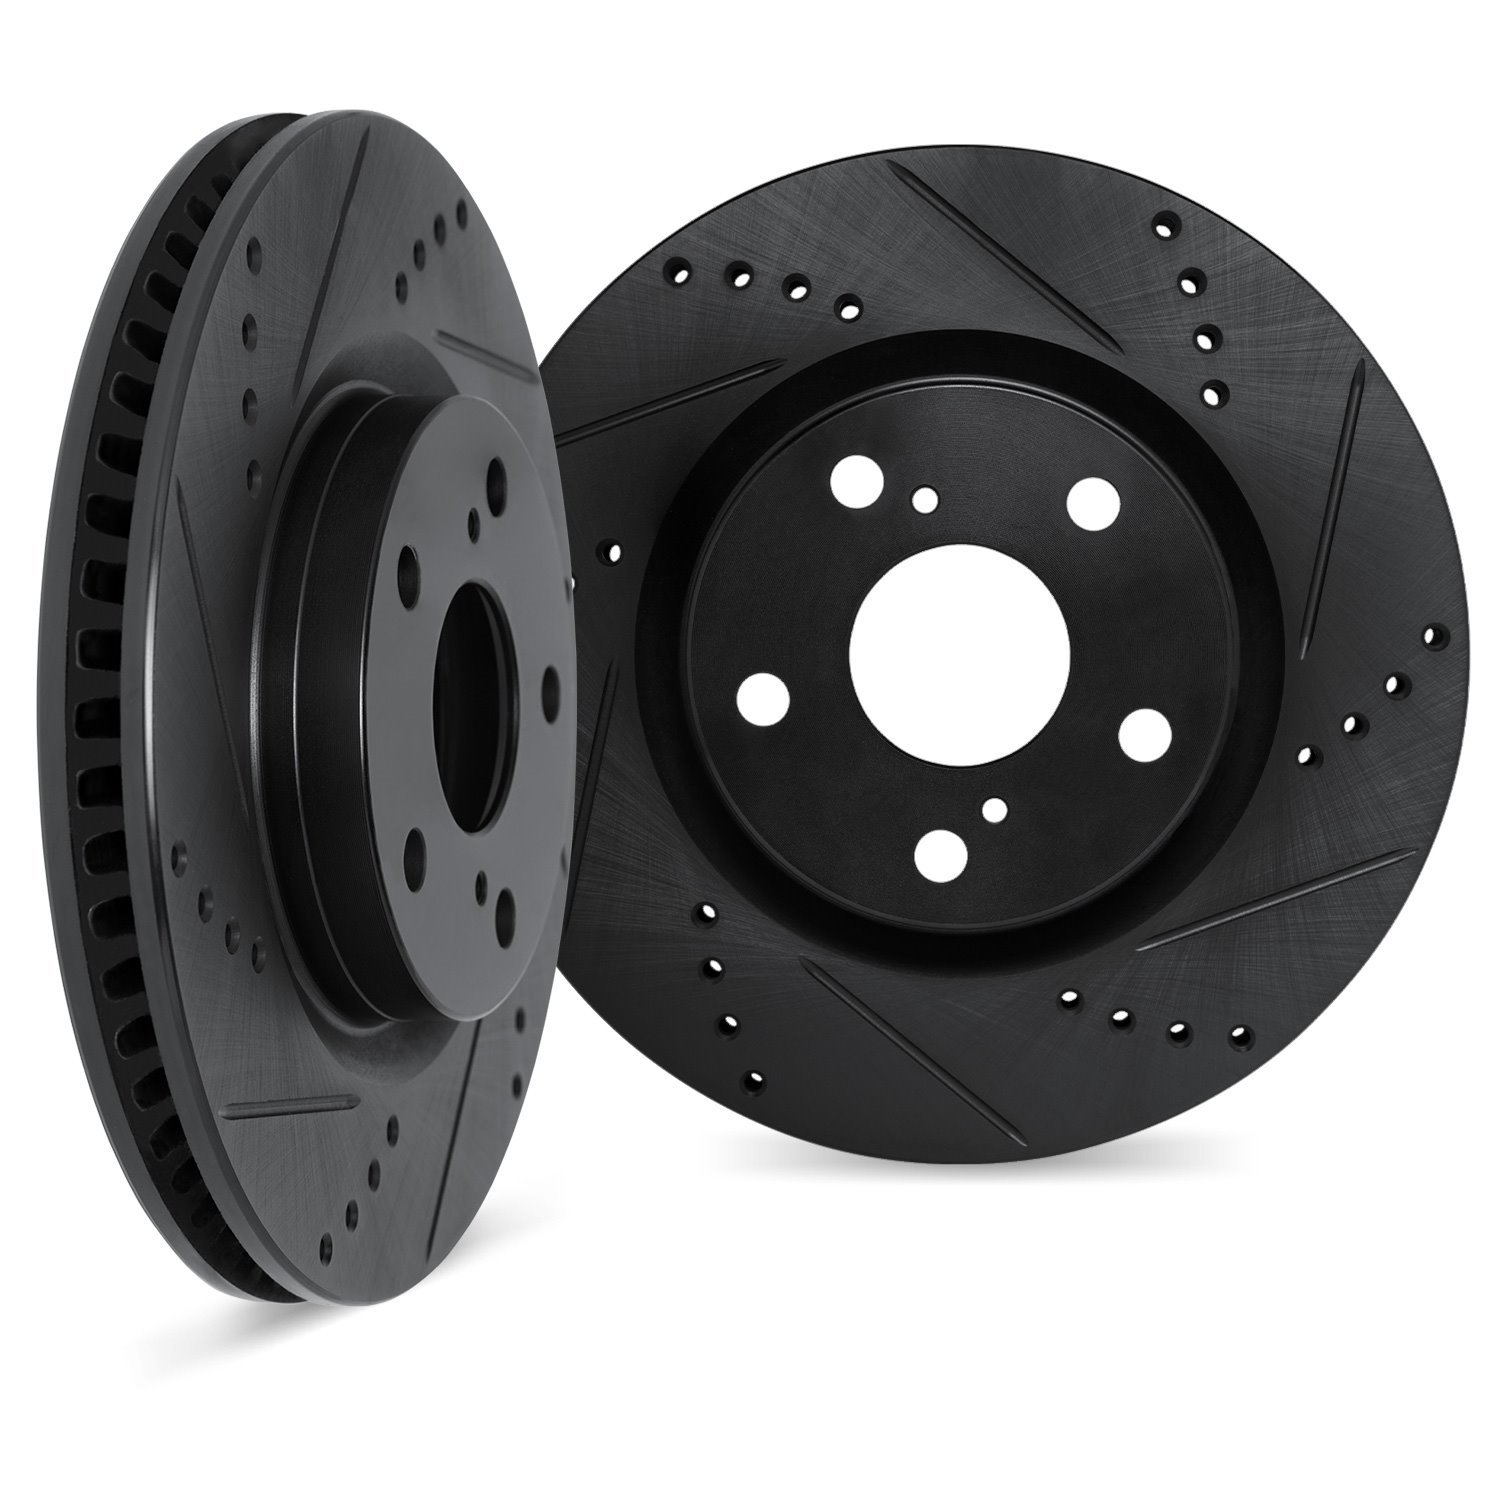 8002-32010 Drilled/Slotted Brake Rotors [Black], Fits Select Mini, Position: Front